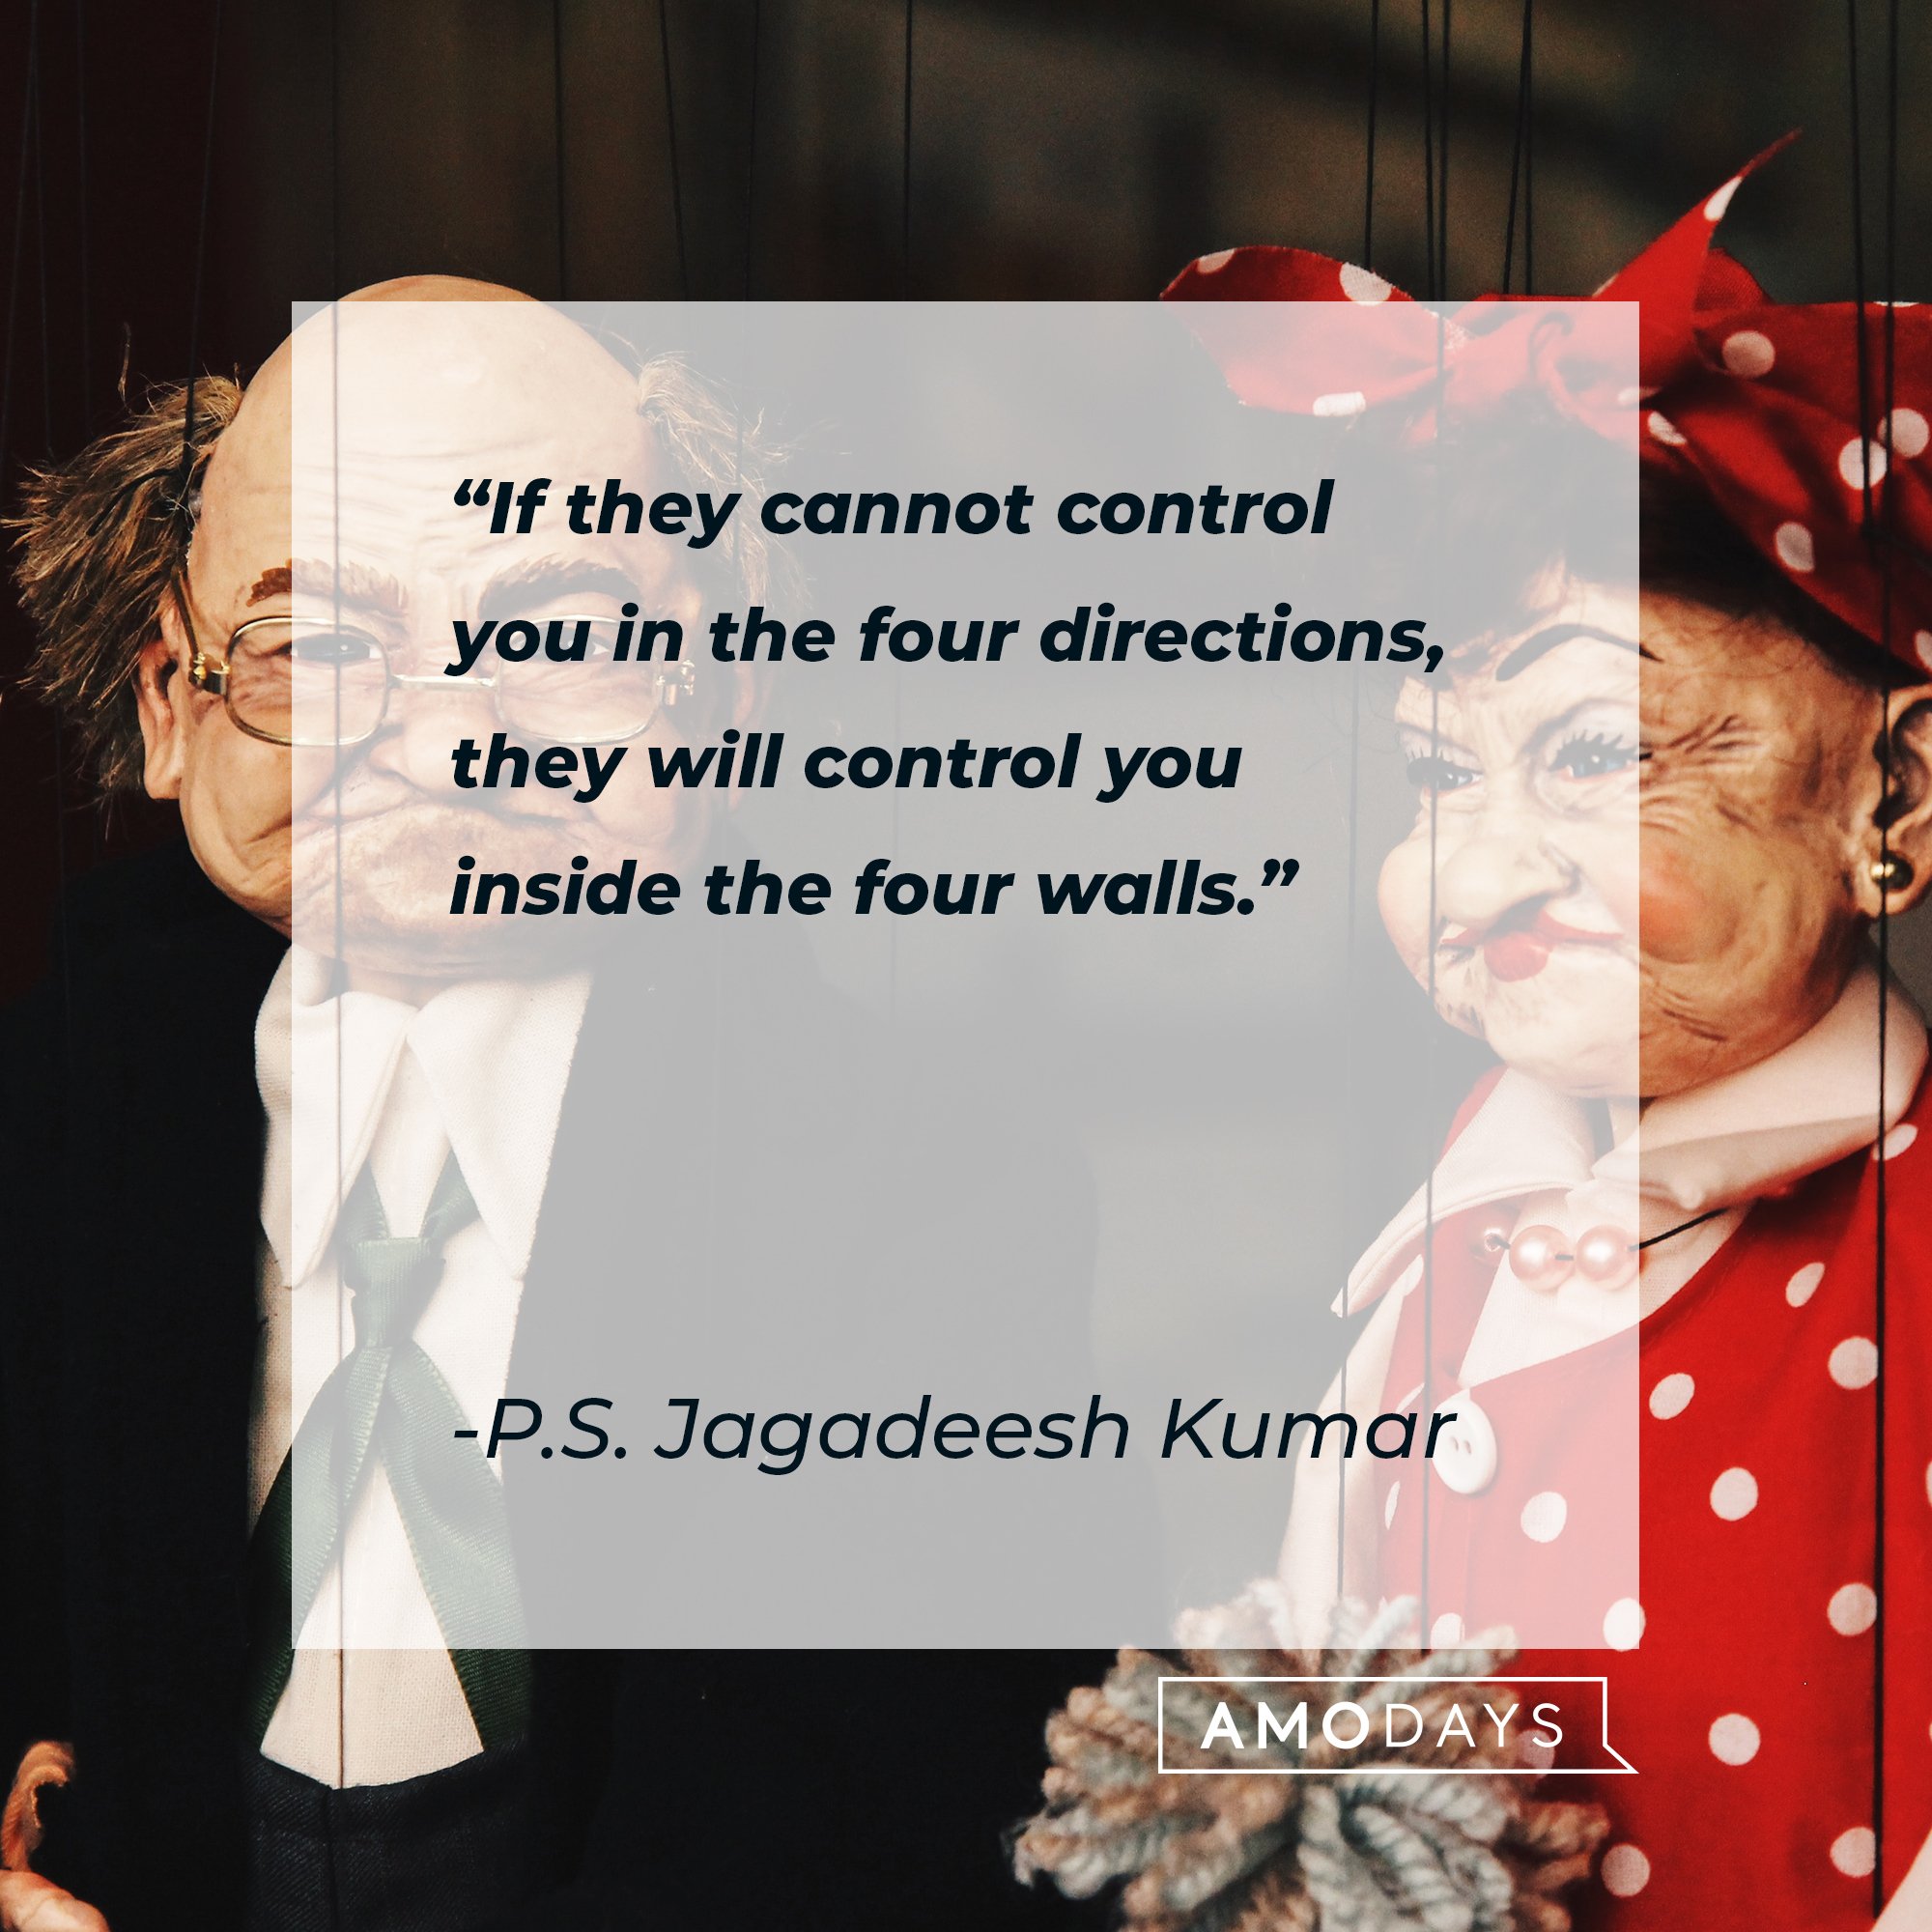 P.S. Jagadeesh Kumar's quote: "If they cannot control you in the four directions, they will control you inside the four walls." | Image: AmoDays